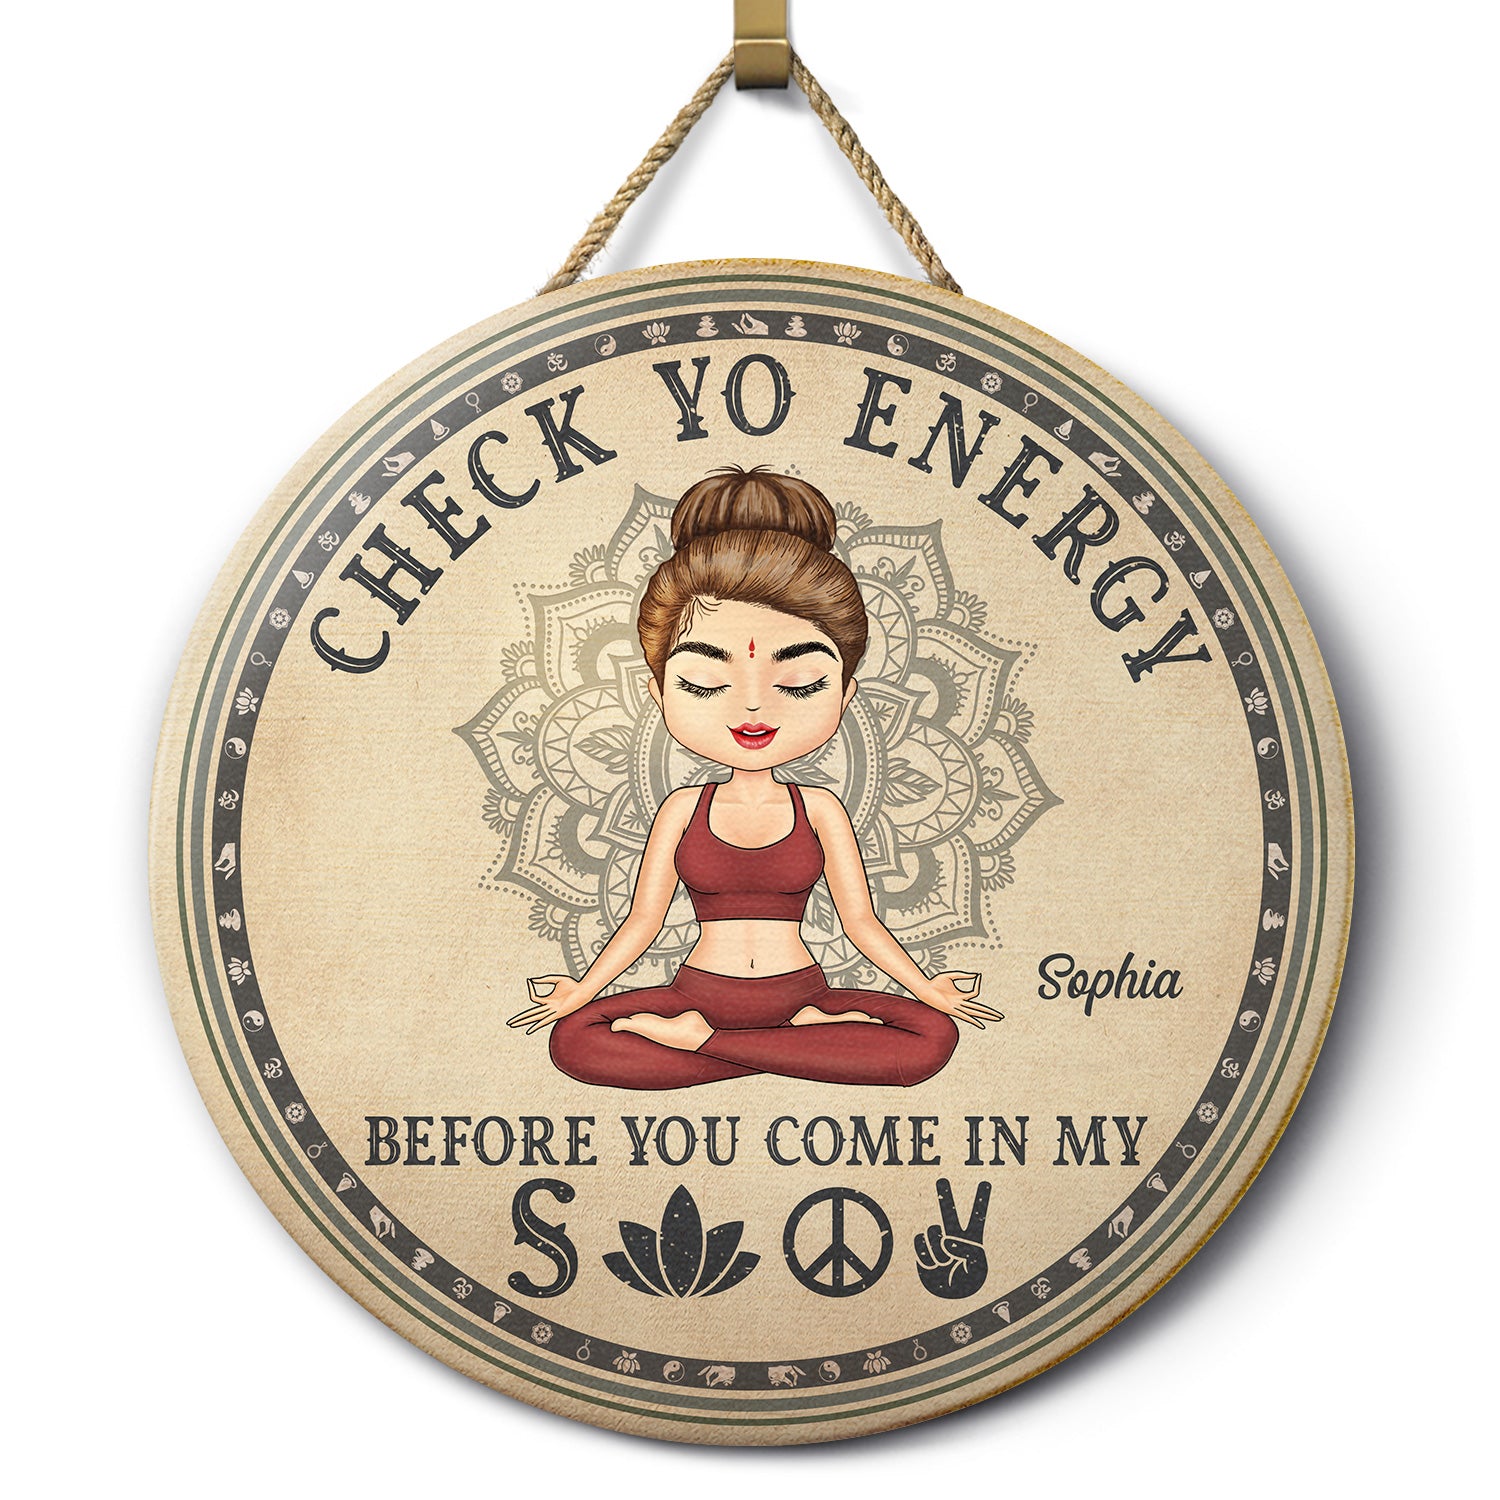 Check Yo Energy Before You Come In - Home Decor, Gift For Yoga Lovers - Personalized Wood Circle Sign